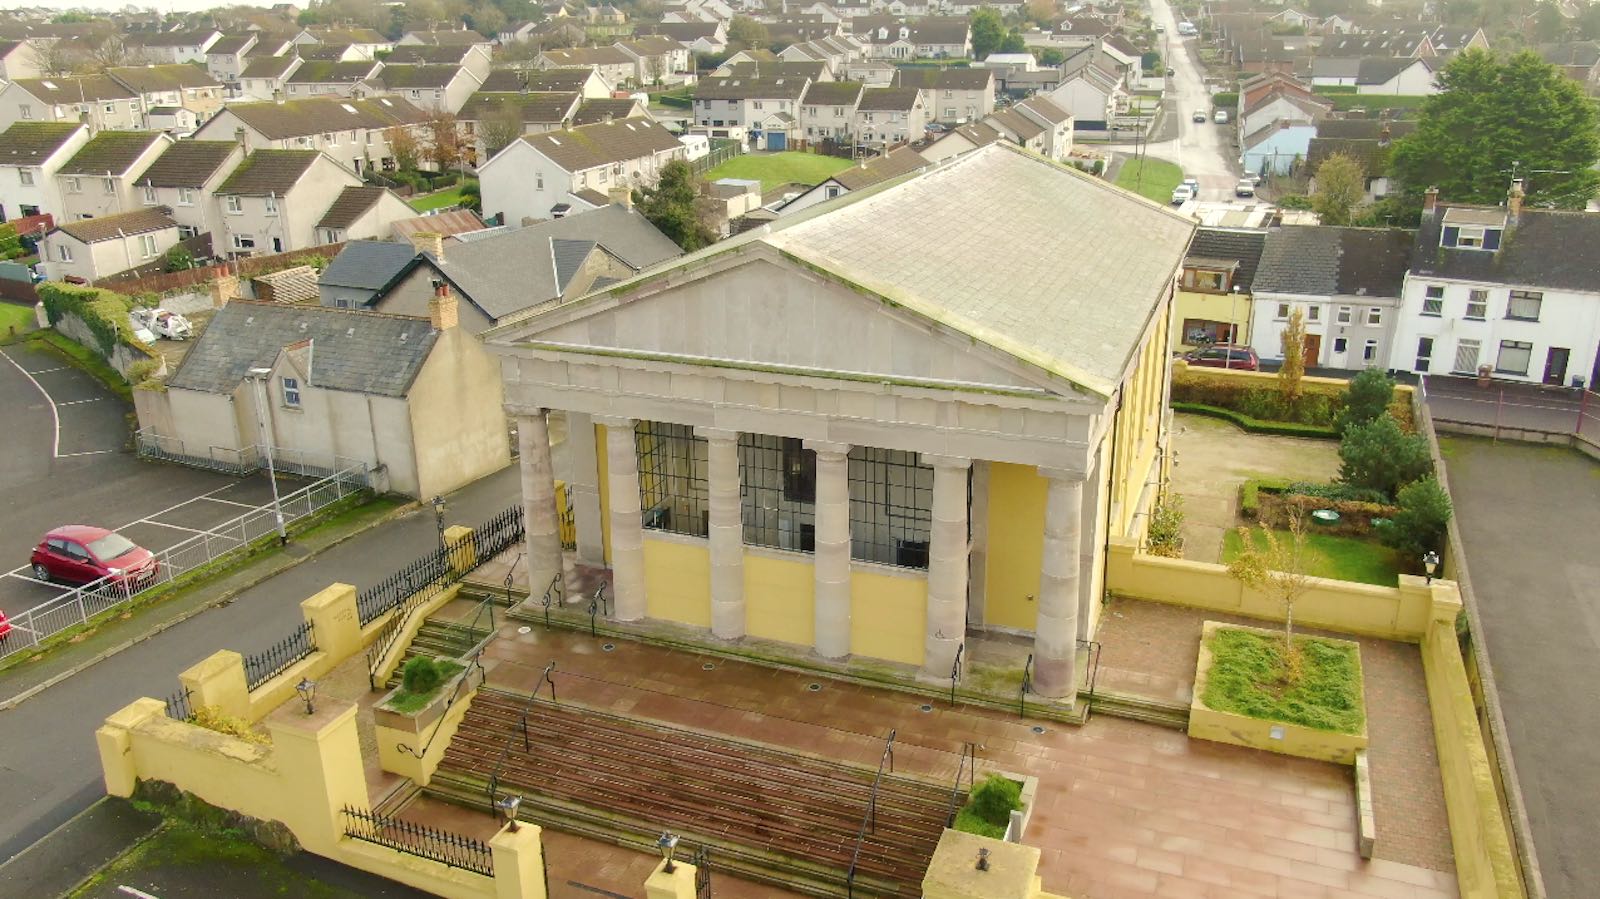 Aerial view of The Portico Ards Portaferry by Bout Yeh drone photography and video production Northern Ireland - image 5